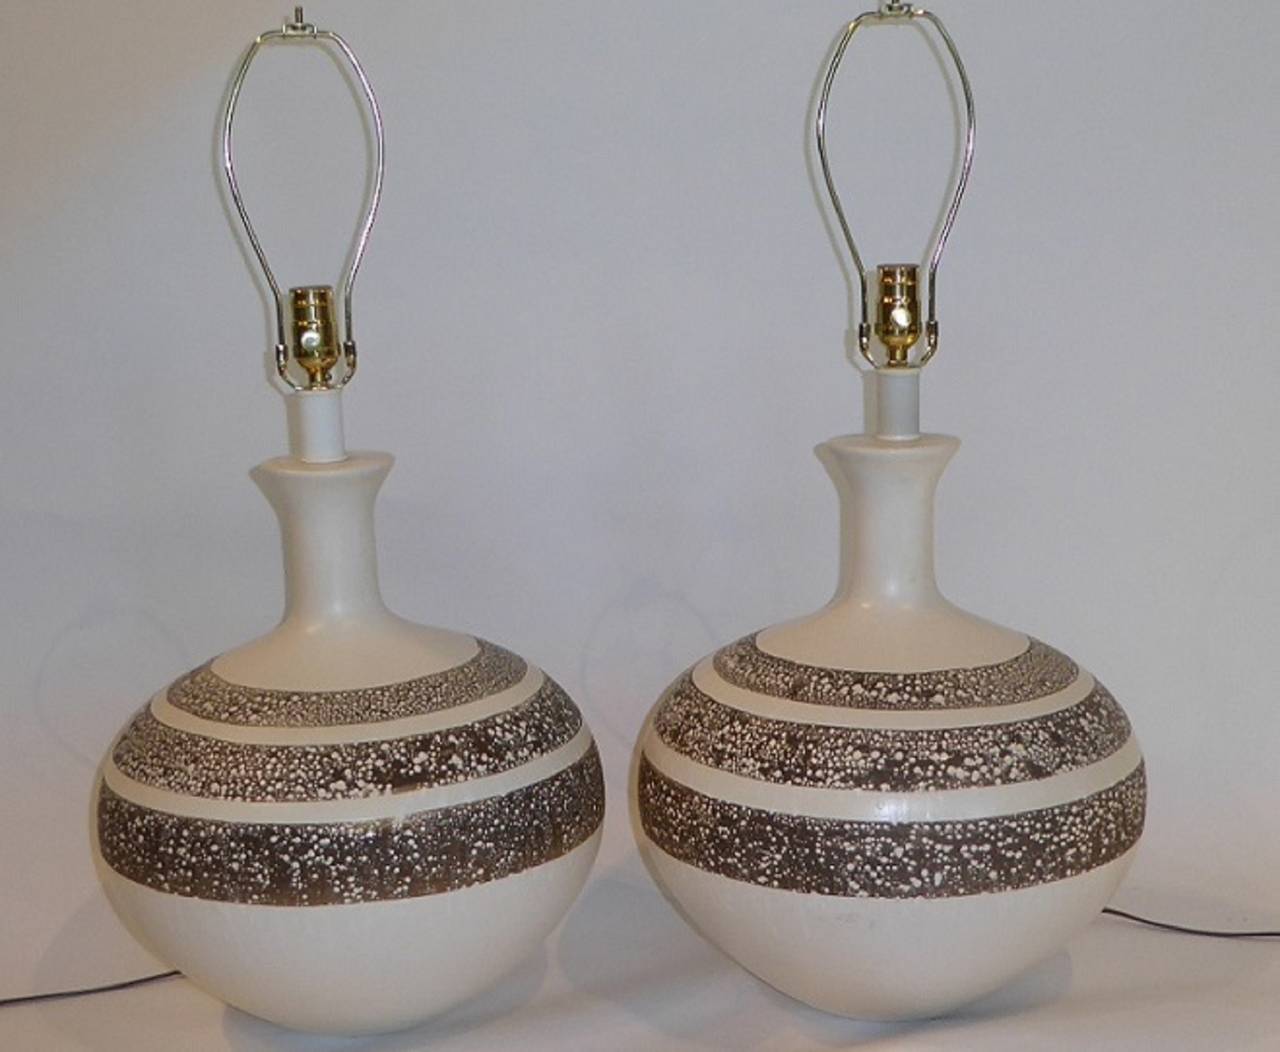 Really fat and fun vase form pottery lamps in a creamy white glaze with three concentric bands of unglazed dark chocolate brown splattered and dripped with the white glaze covering the rest of the body. Great lava glaze piece of the period.